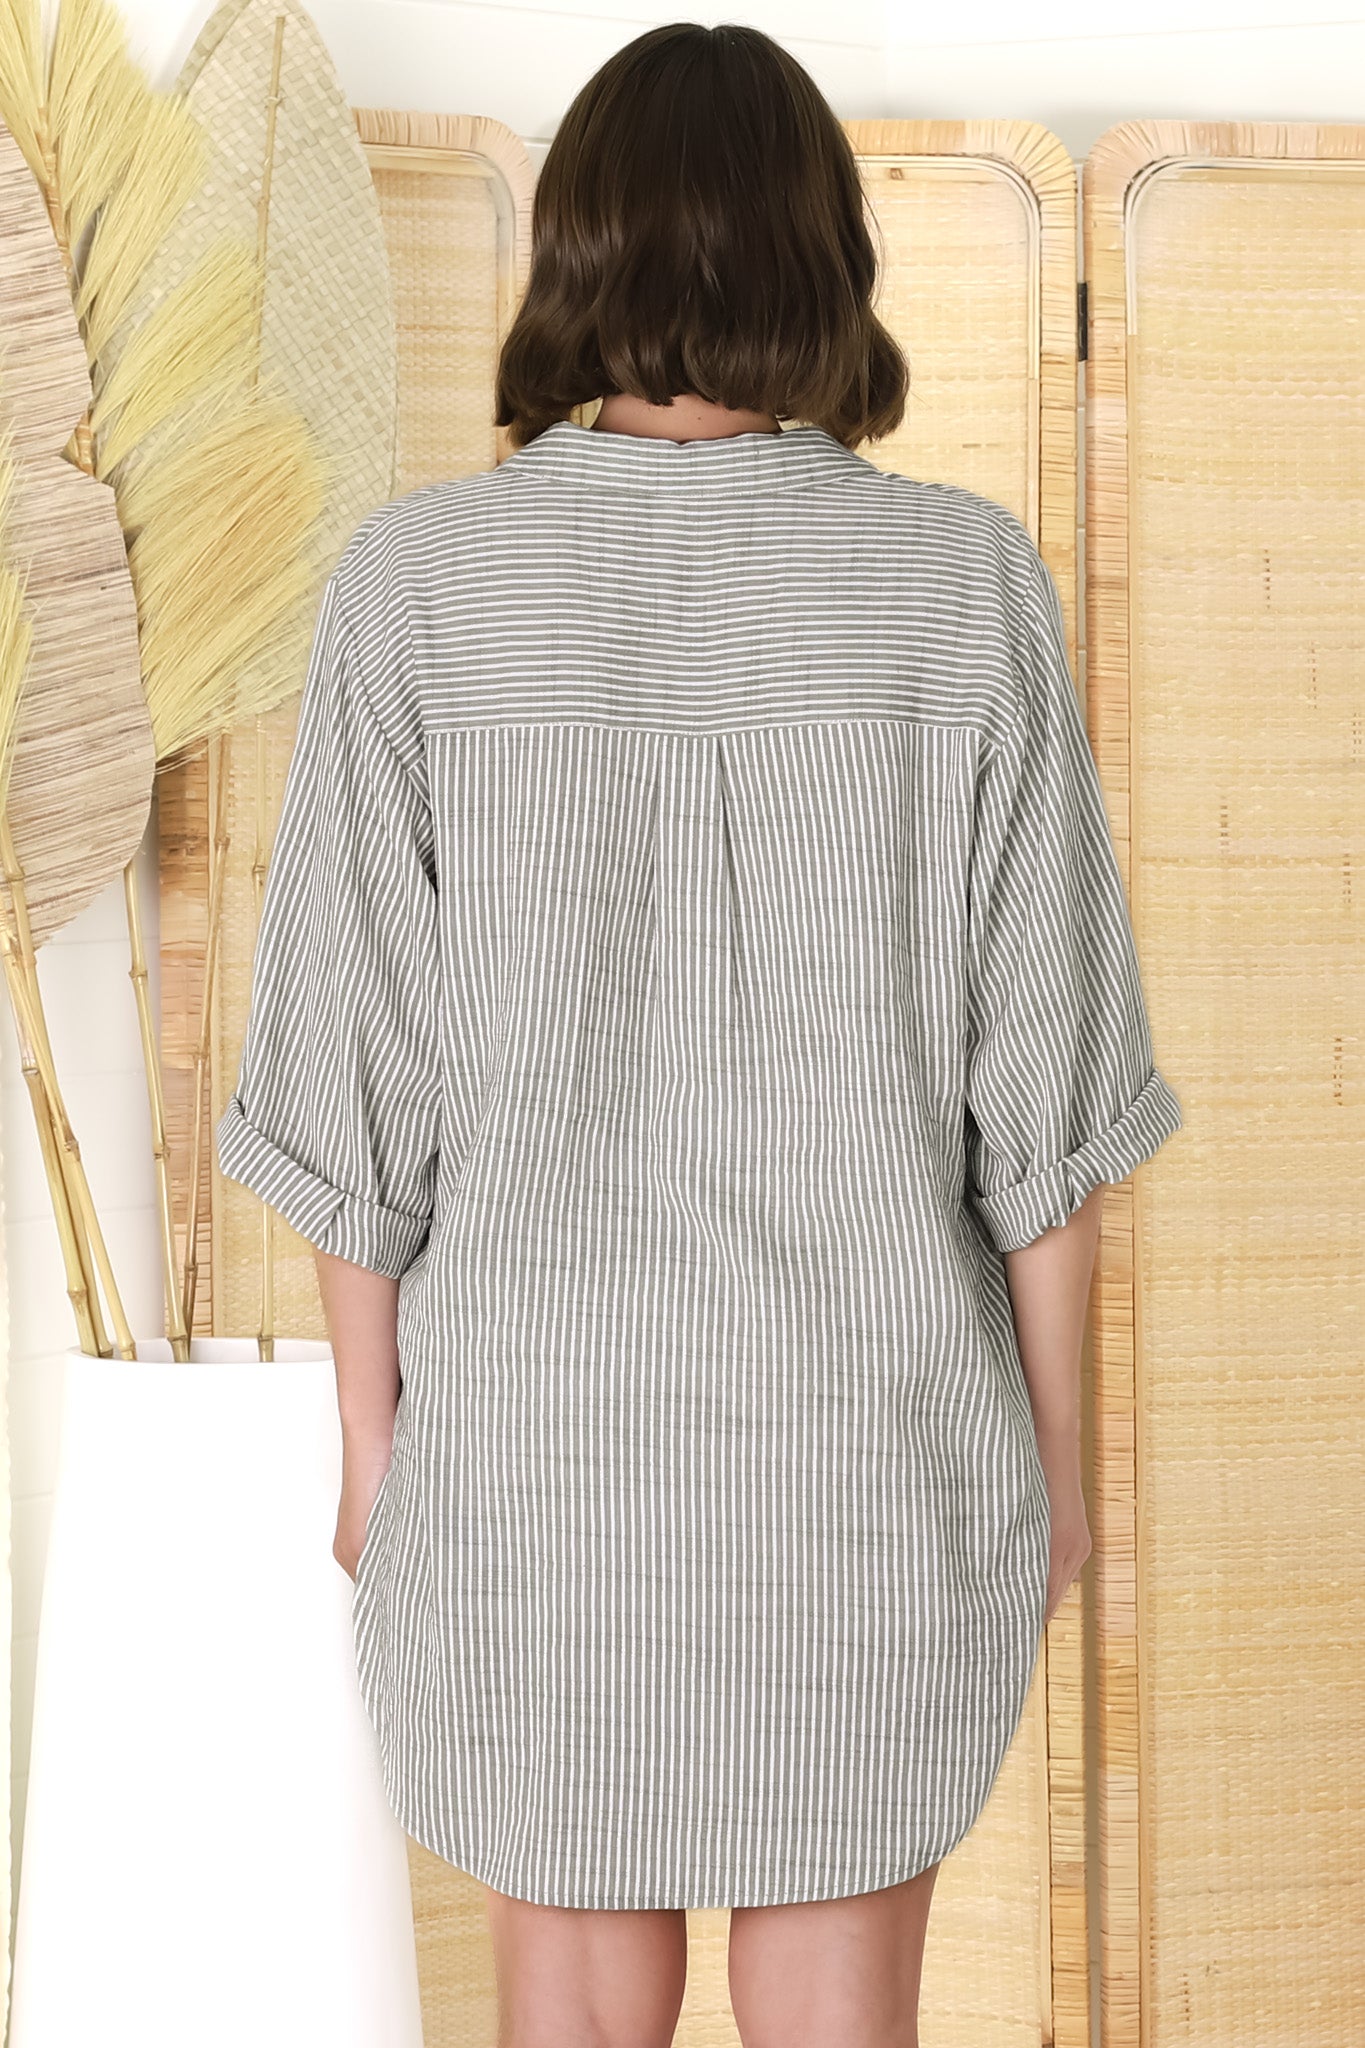 Beachly Stripe Shirt - Pin Stripe Relaxed Button Down Shirt in Olive